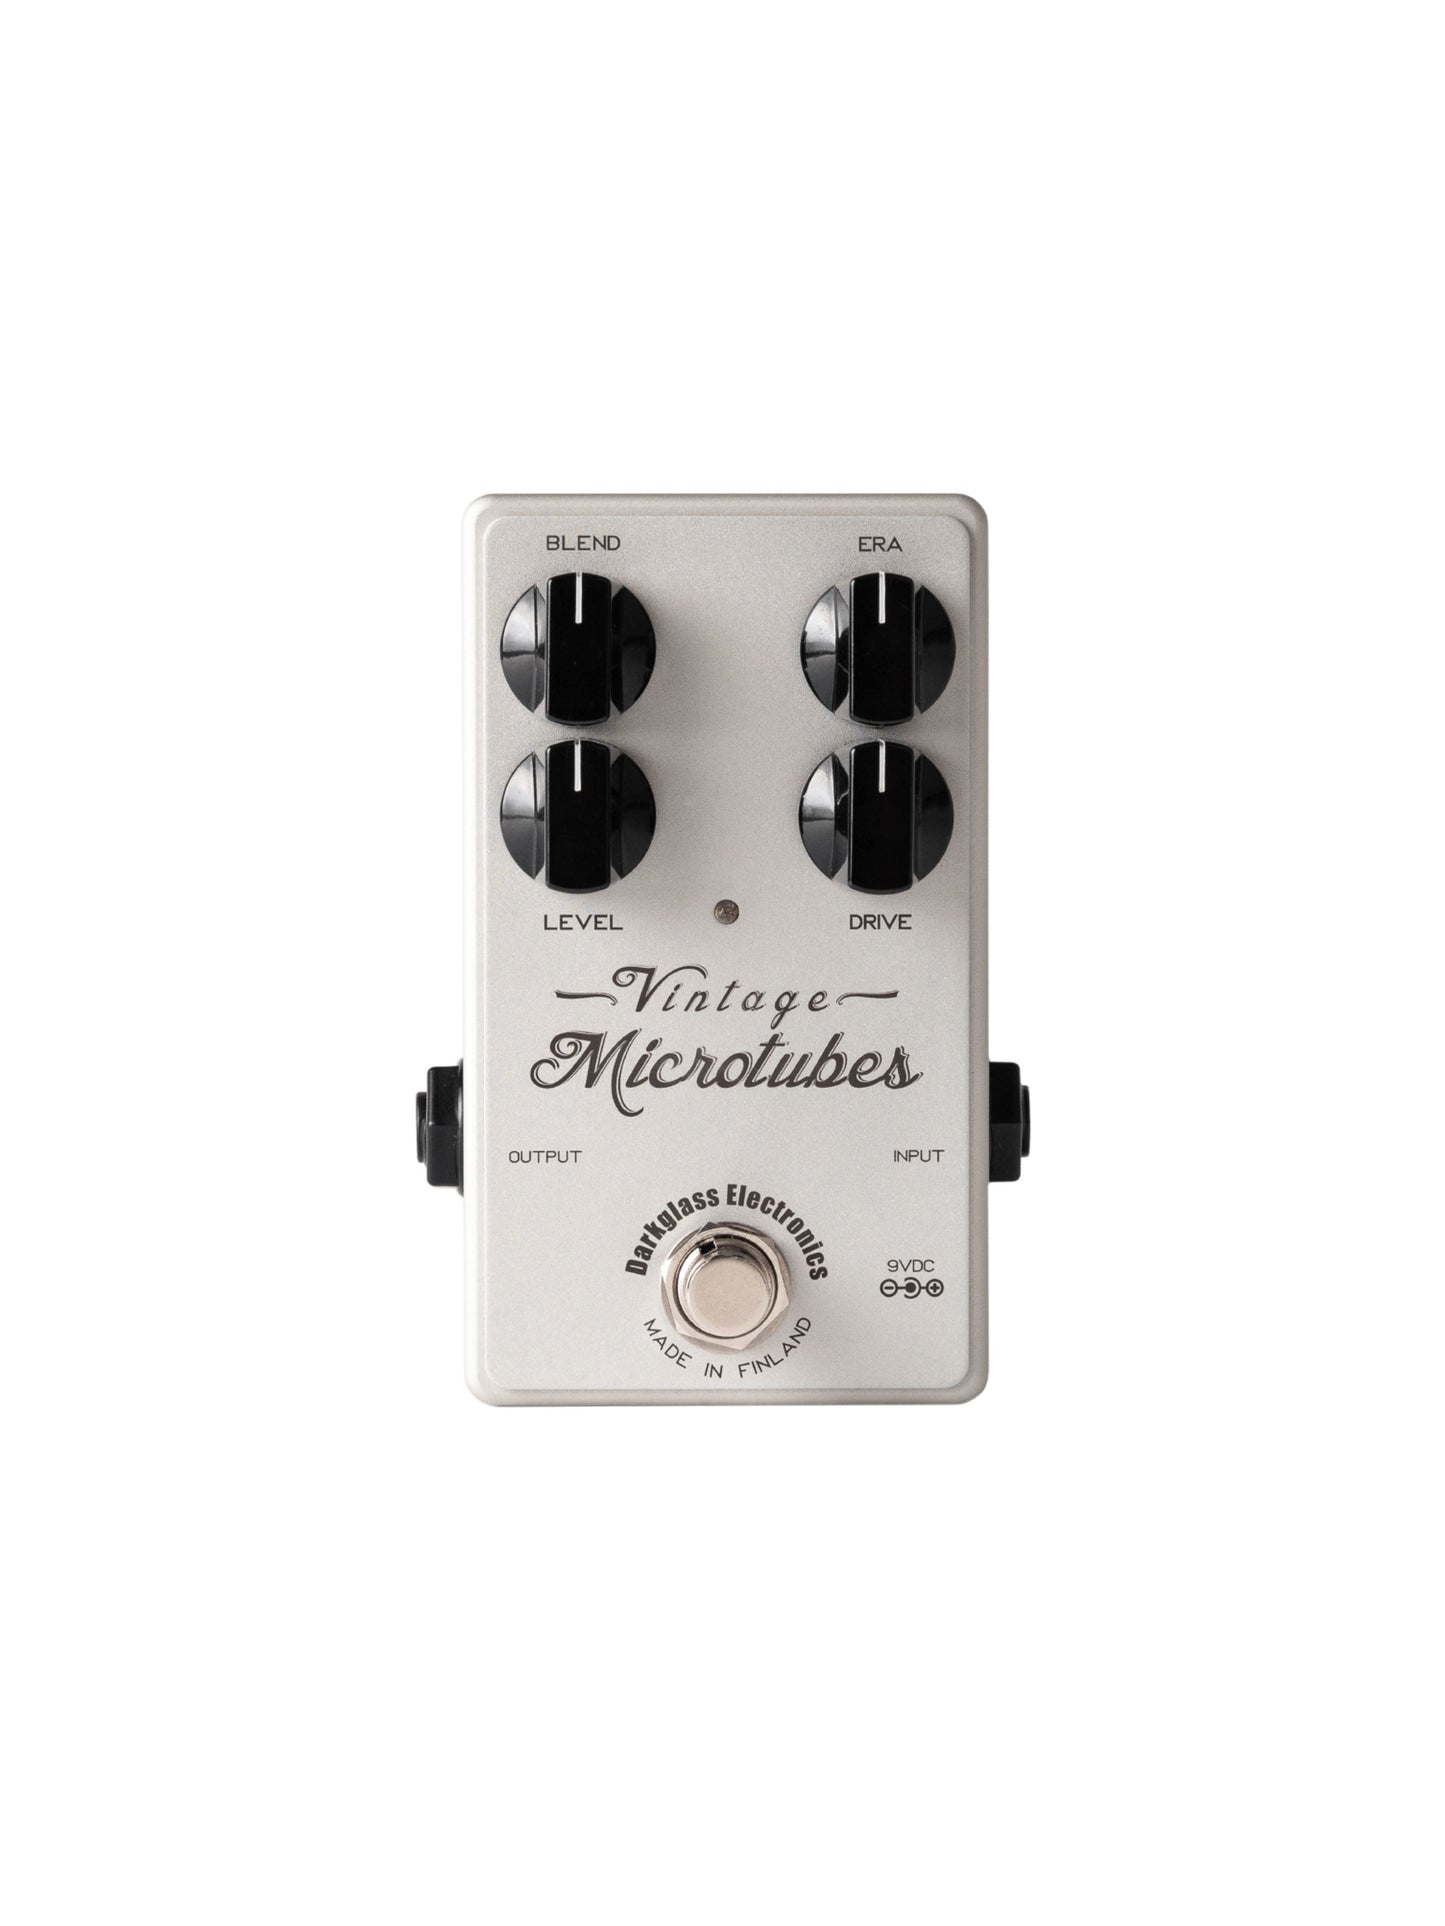 Darkglass Electronics Vintage Microtubes Bass Overdrive Pedal